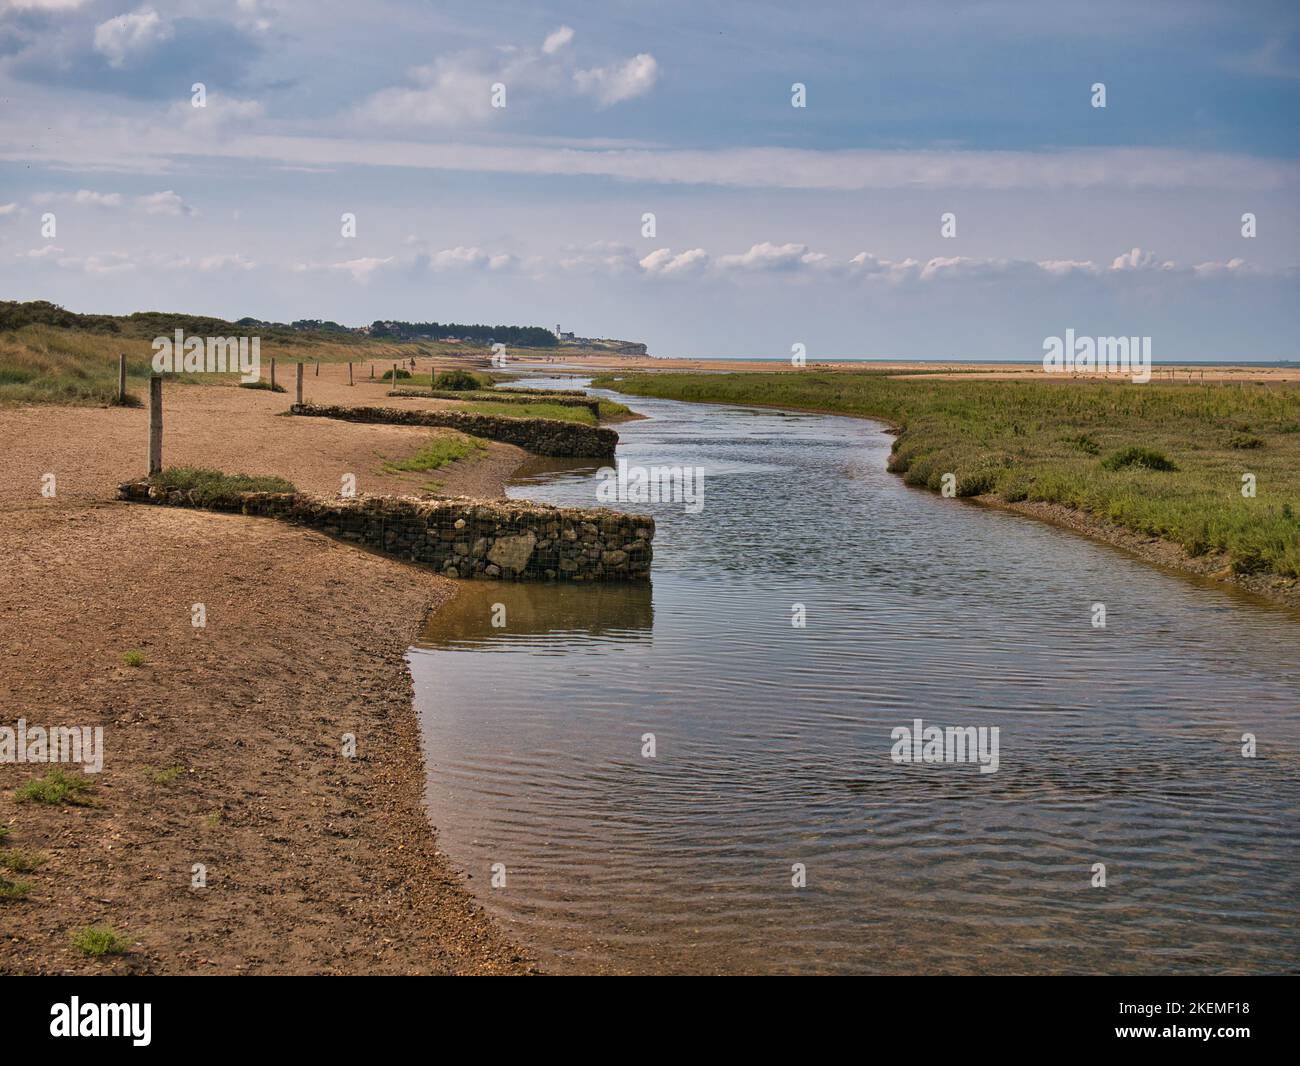 The North Norfolk coastal wetlands, in the east of the UK. Taken on a calm, sunny day in summer with a blue sky. Stock Photo